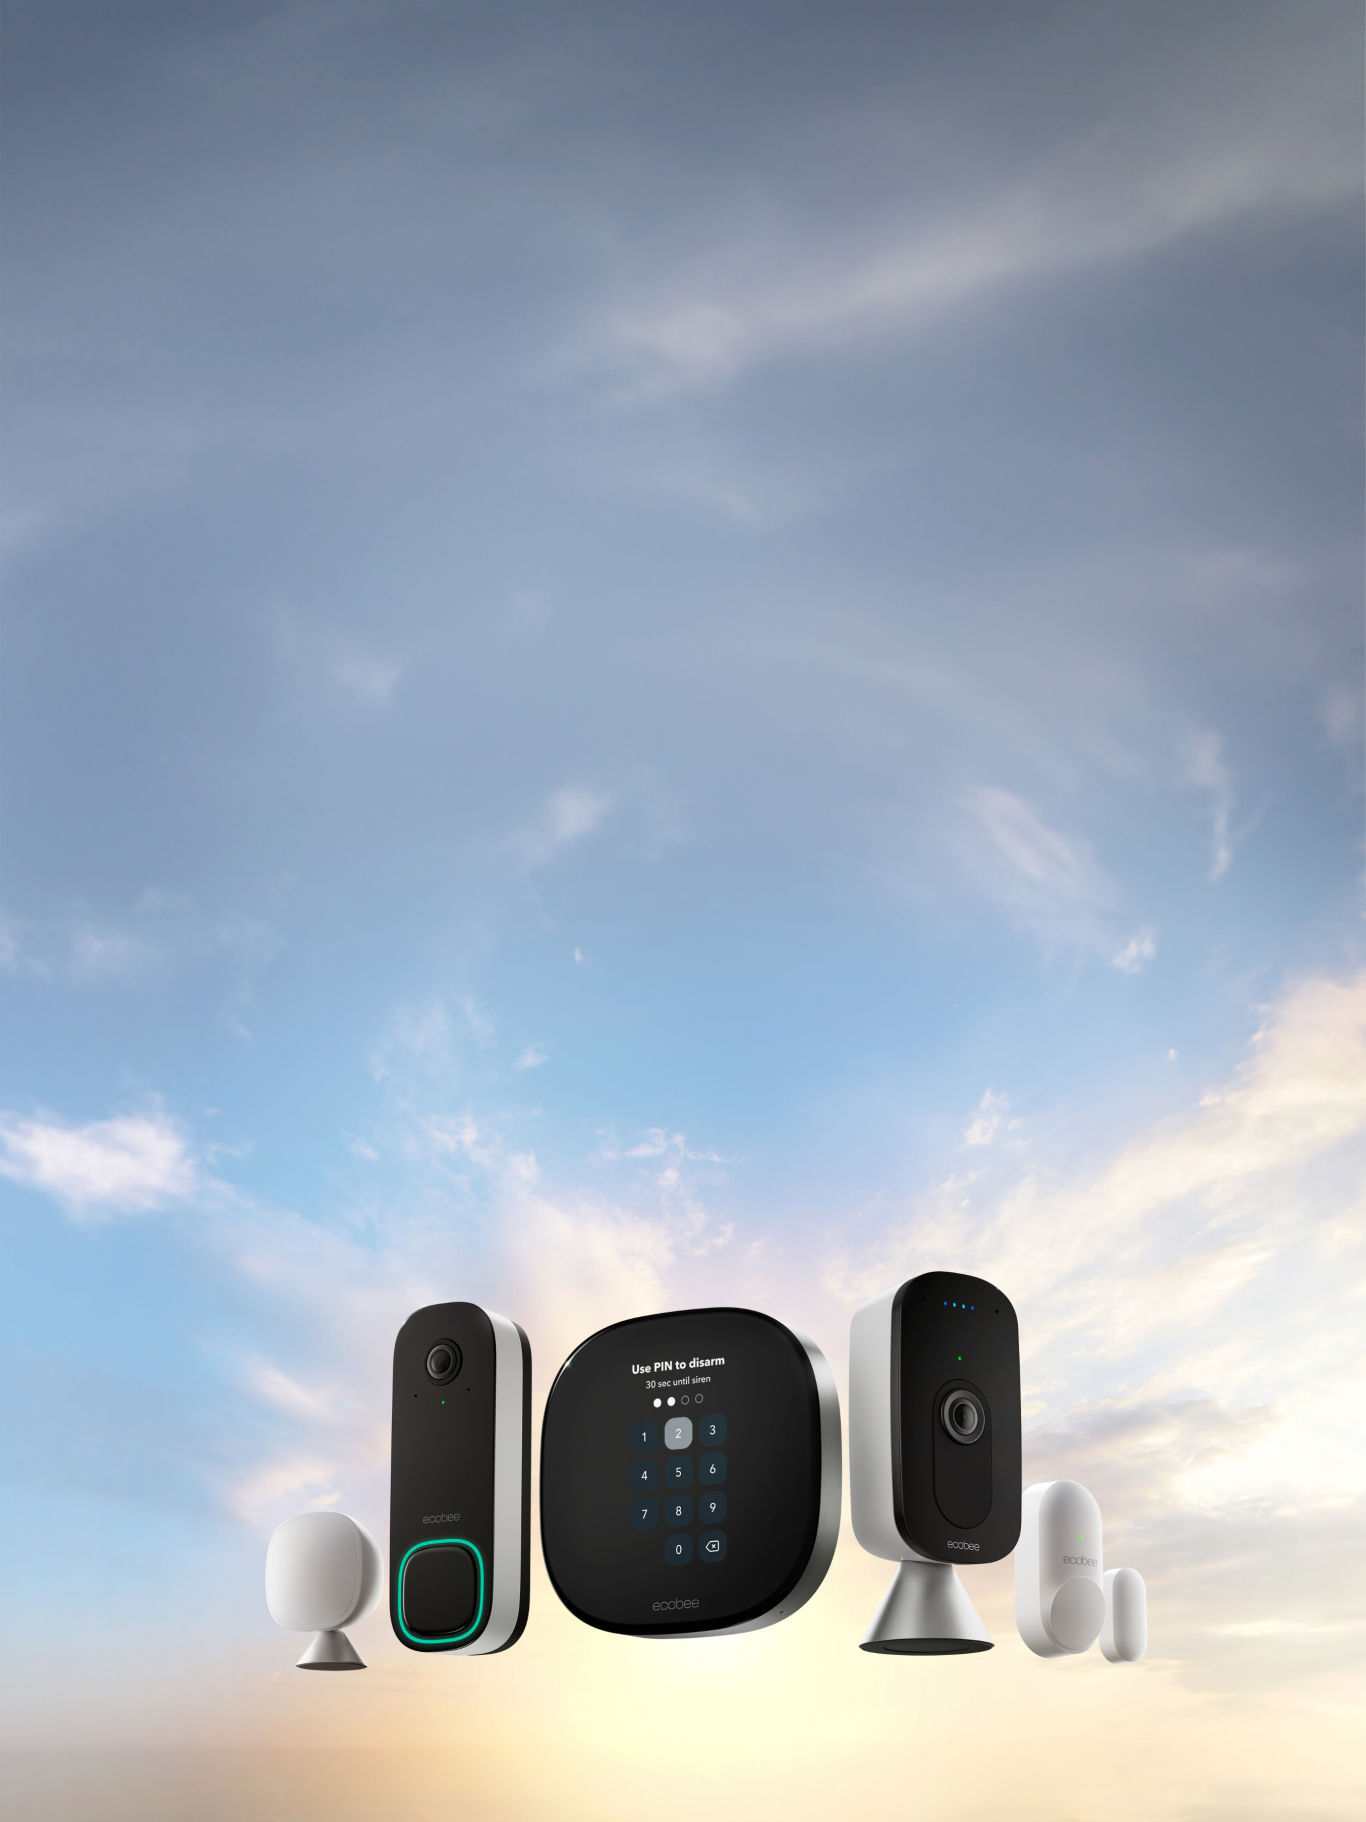 ecobee products including sensors, thermostat, camera, and doorbell camera hover in the sky.